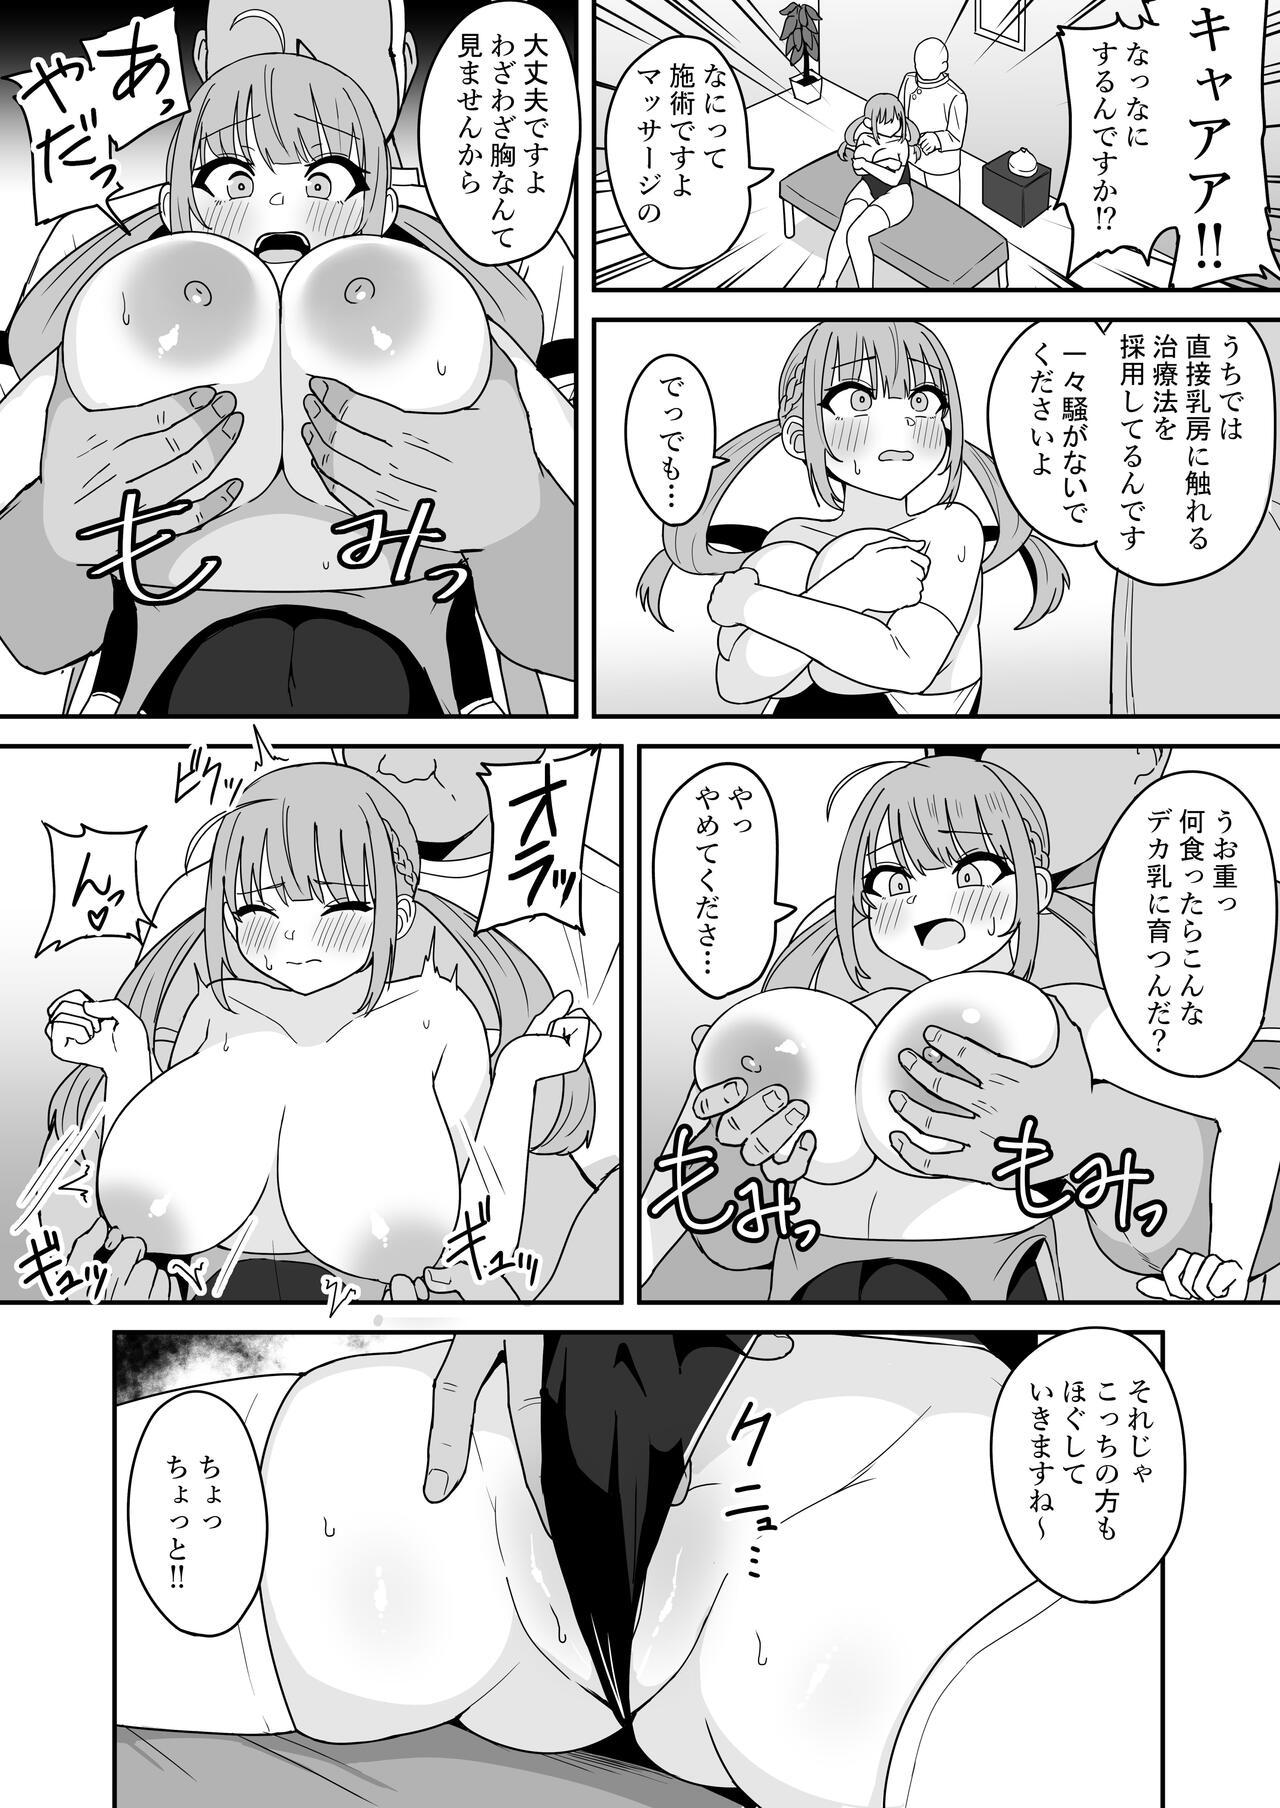 Glory Hole Aqua Gets Sexually Harassed at a Massage Parlor - Hololive Spy Cam - Page 4